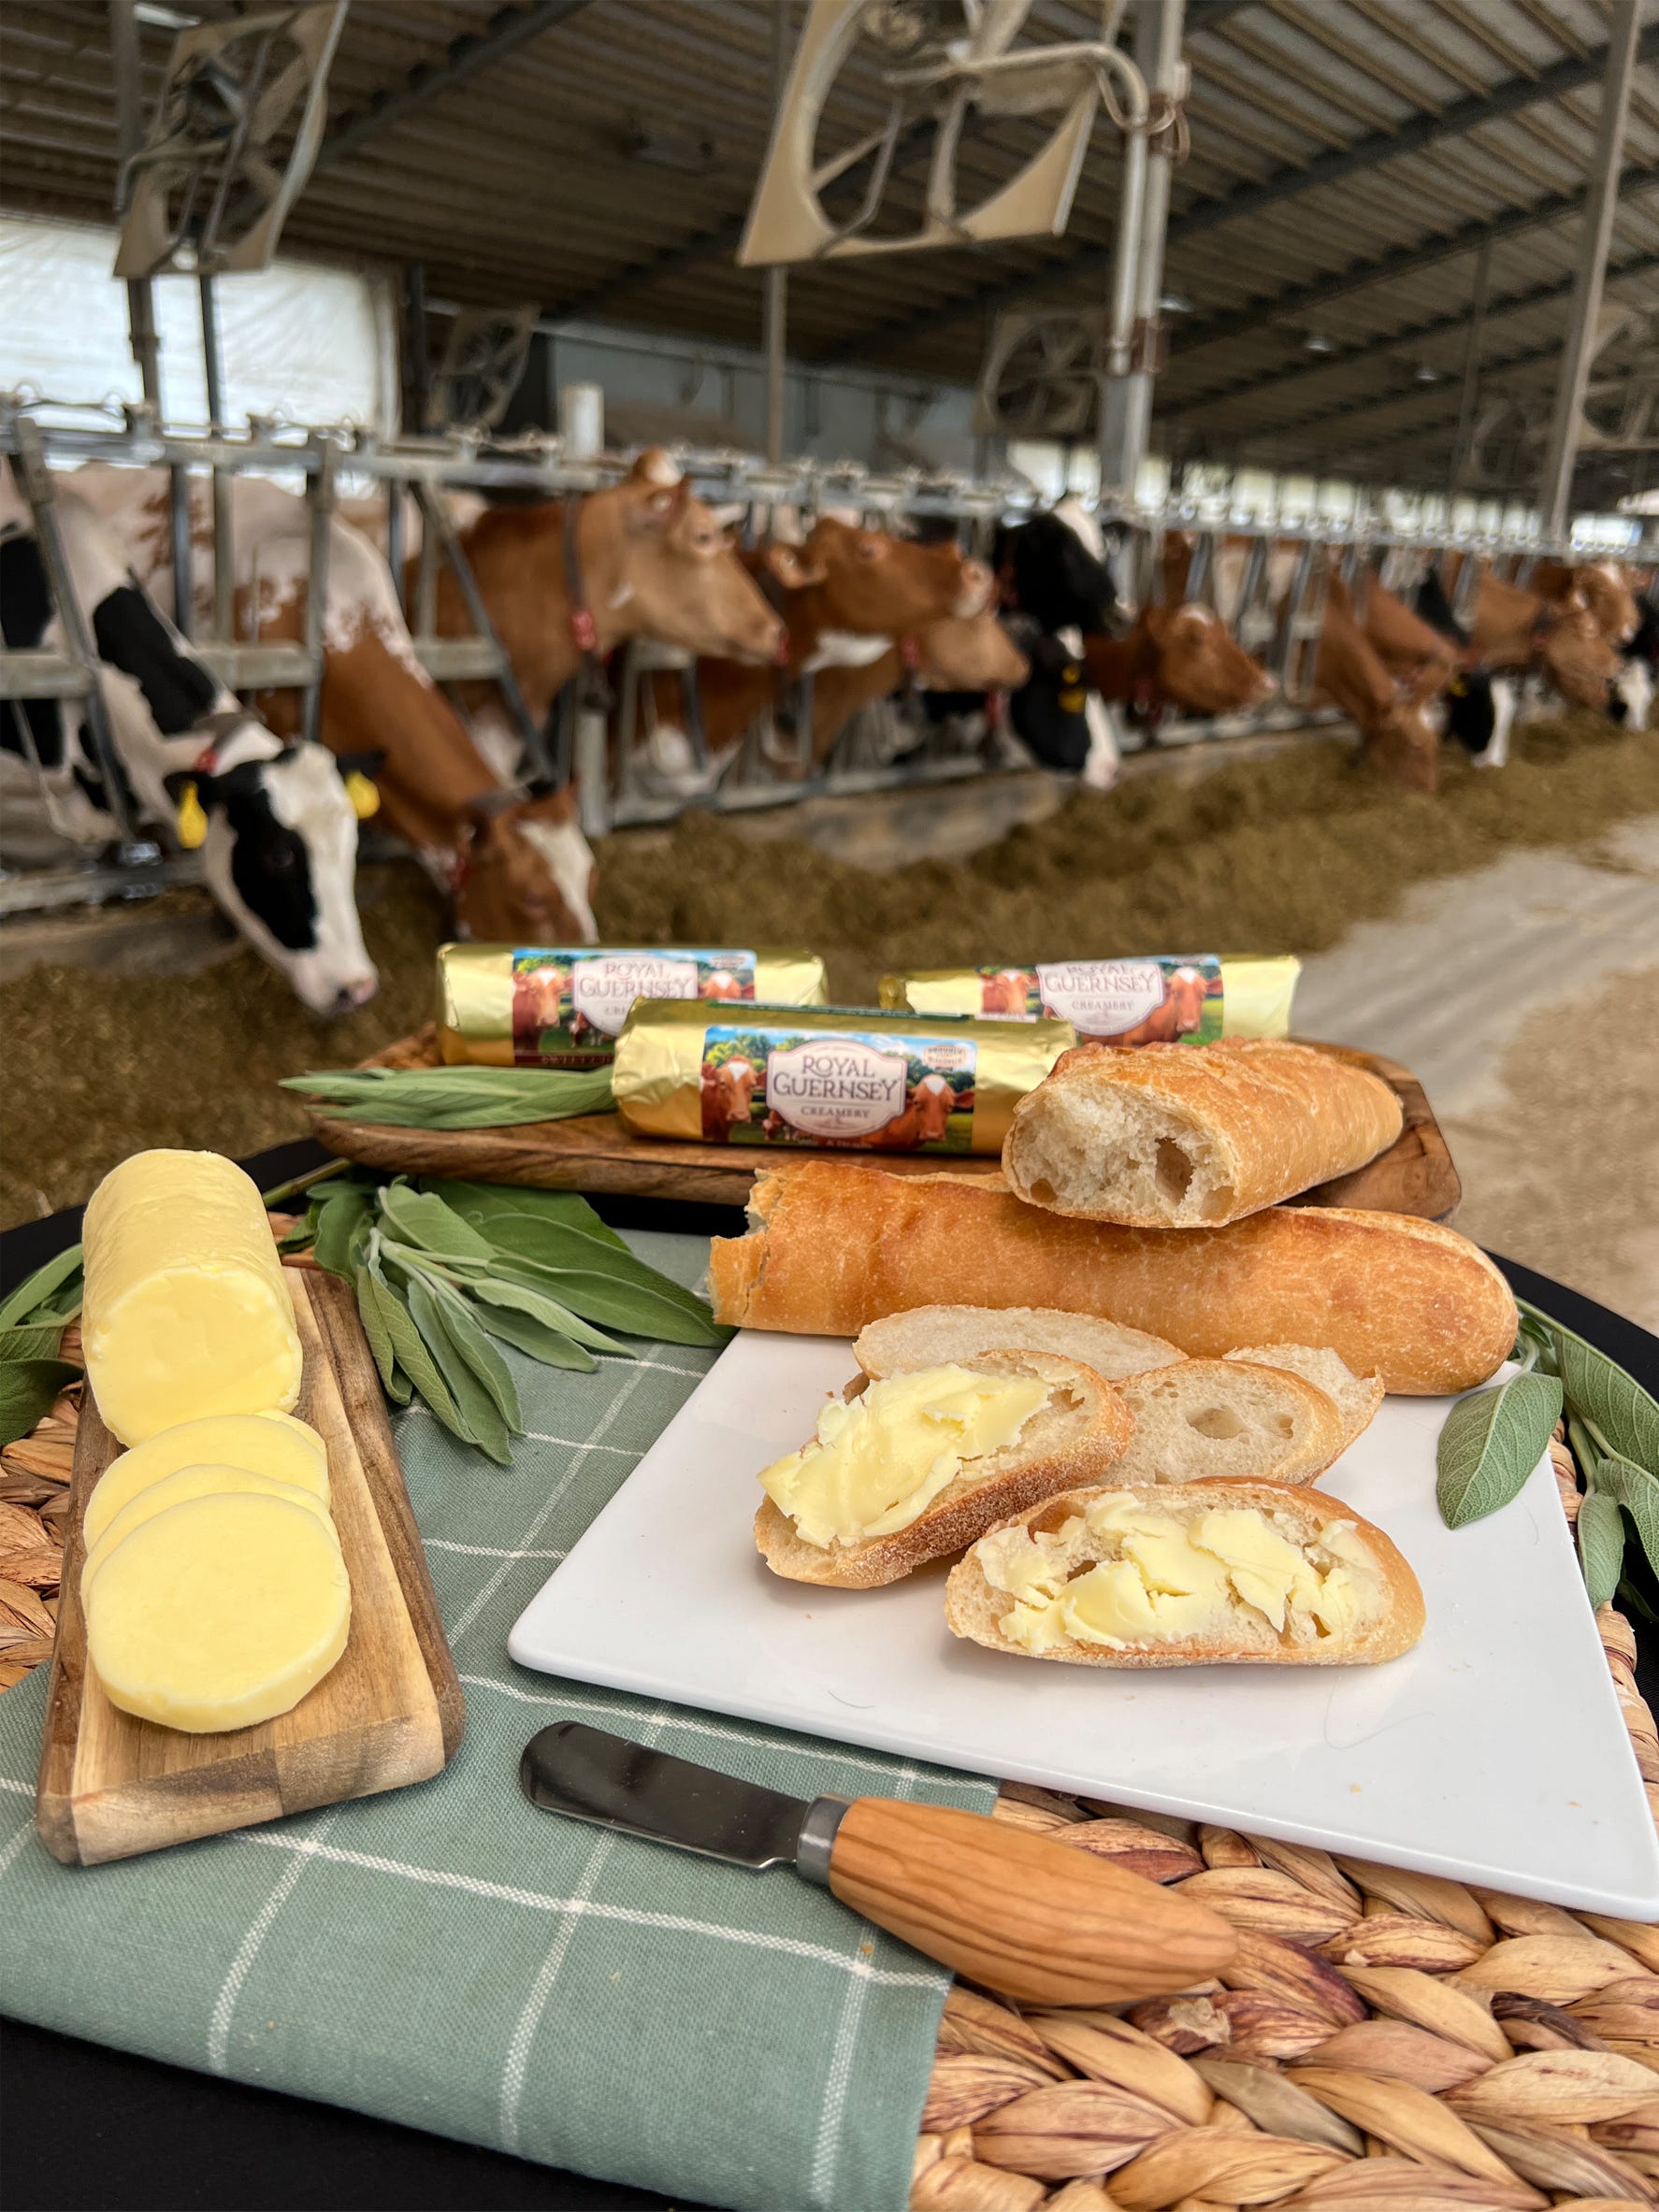 a display or Royal Guernsey Creamery butter and loaves of bread sit on a table with Holstein and Guernsey cows at a feedbunk in the background